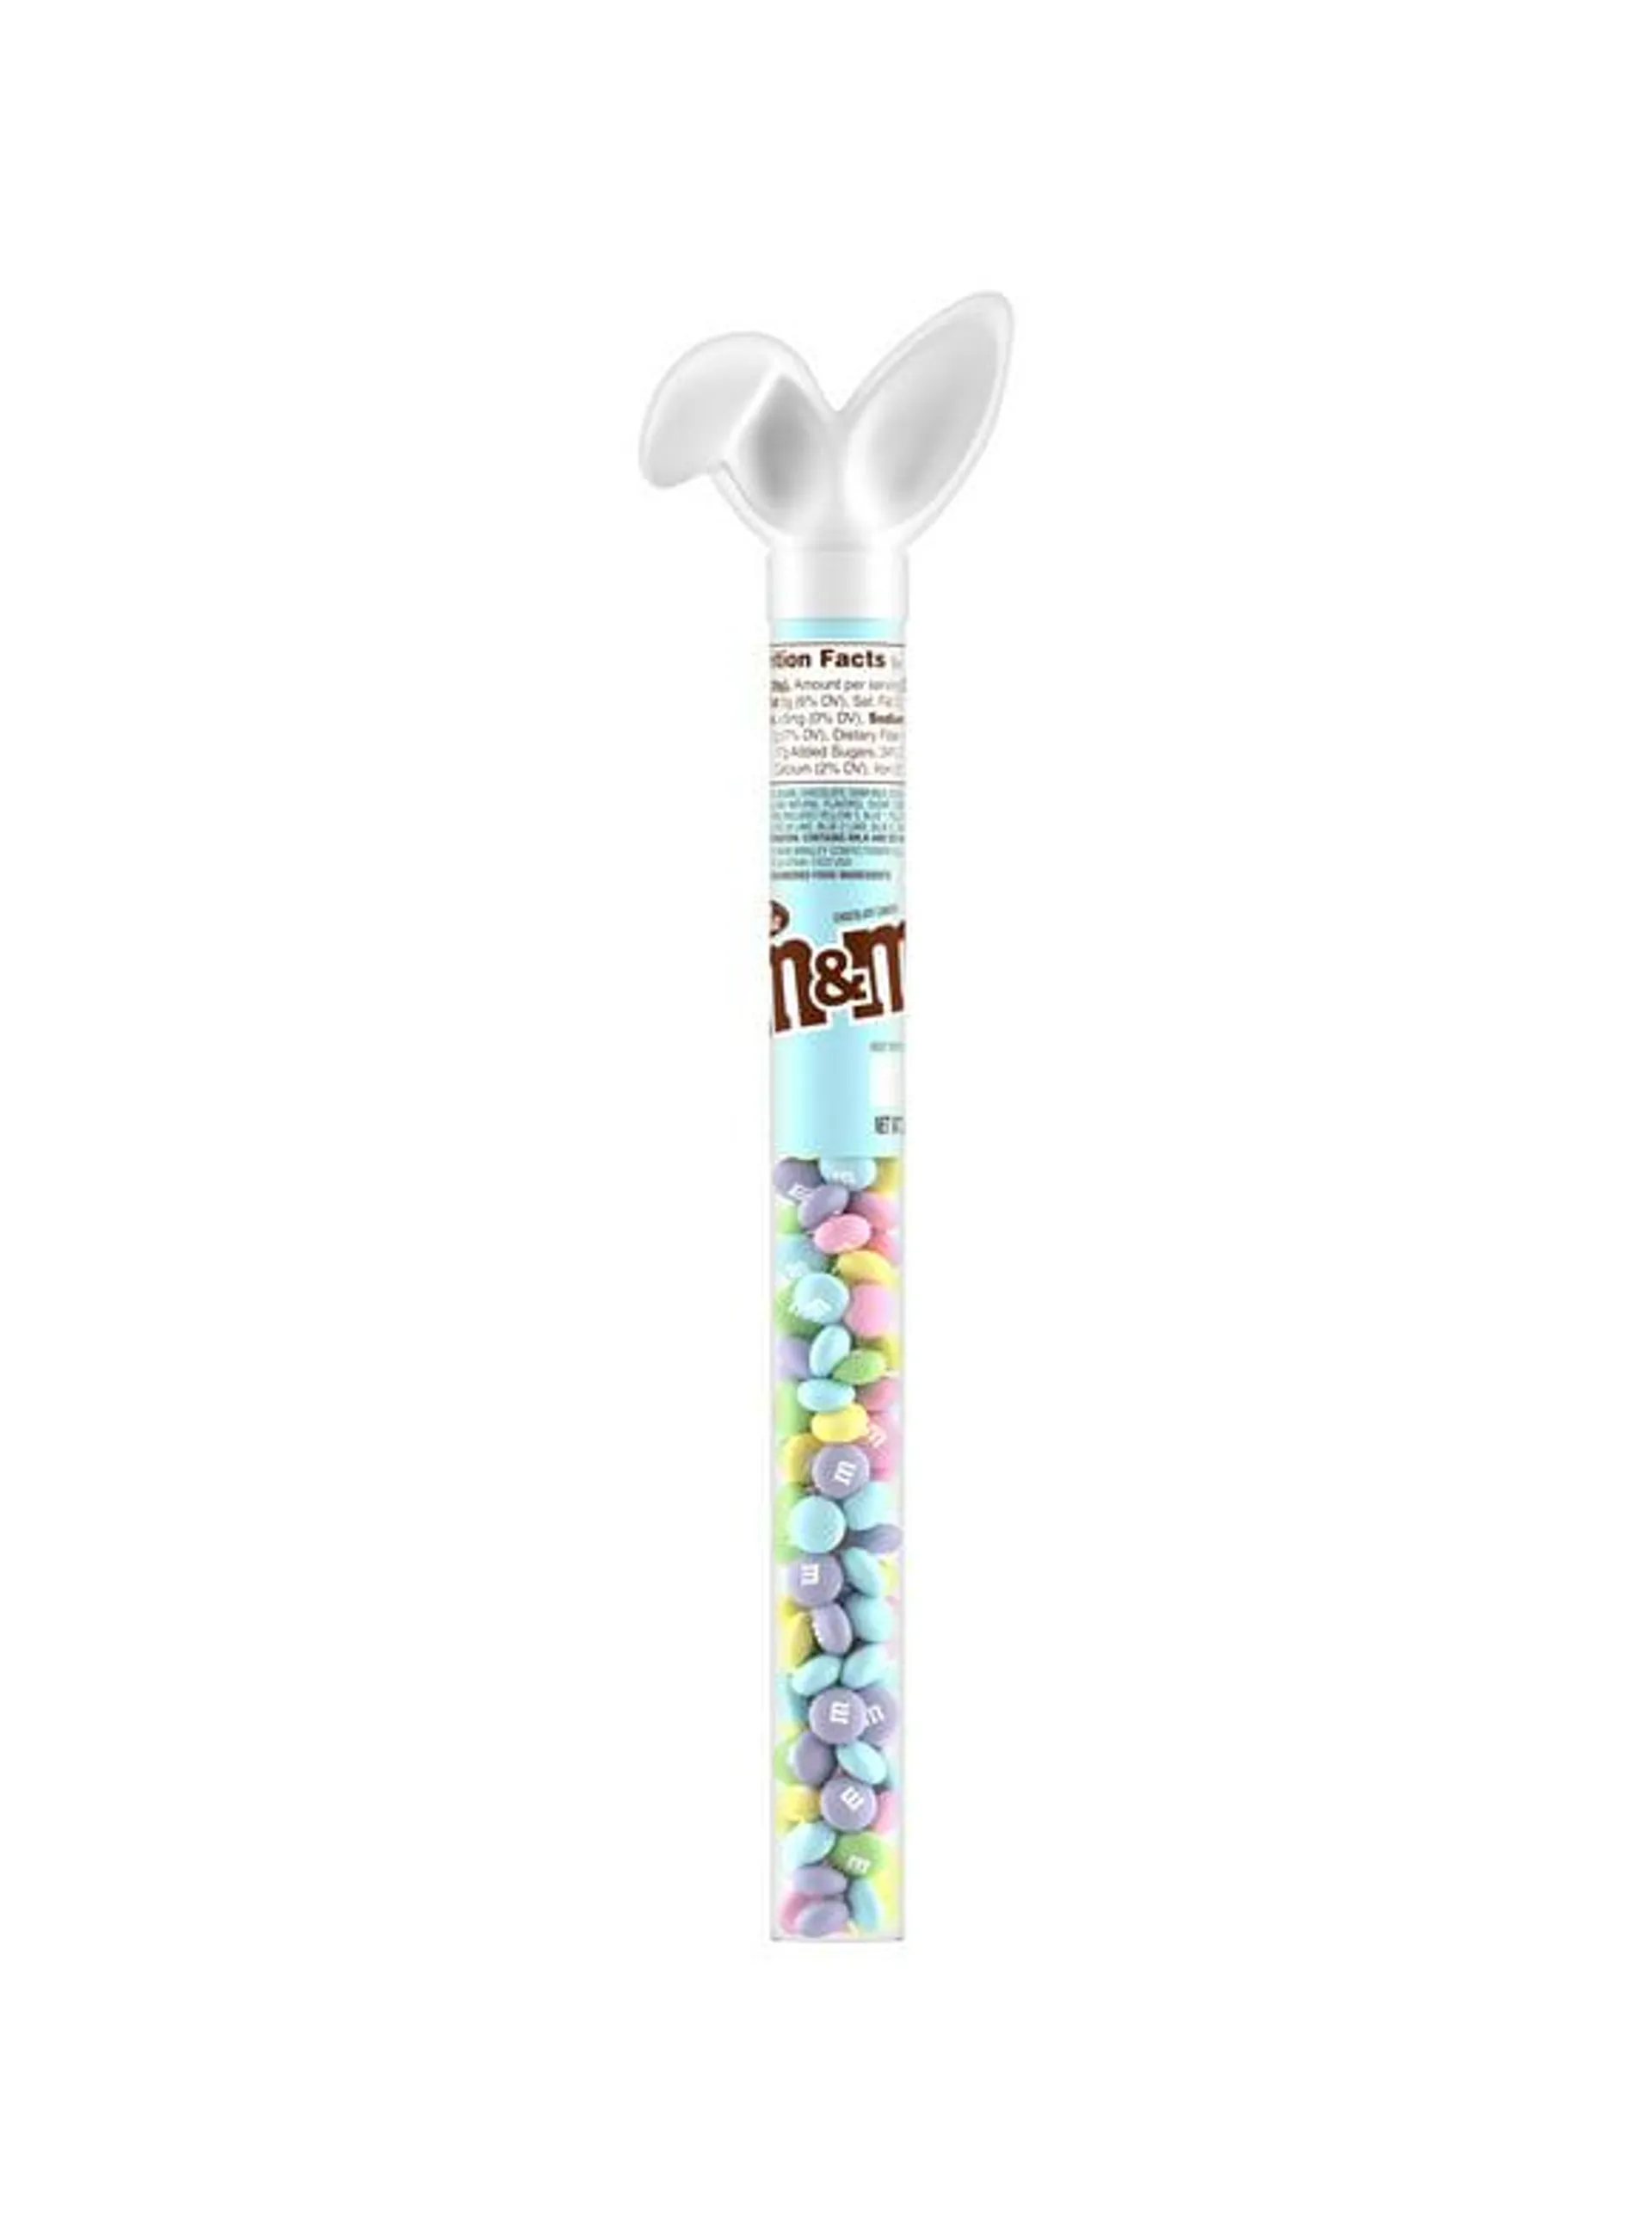 M&M's Milk Chocolate Pastel Blend Easter Candy Bunny Cane - 3 Oz